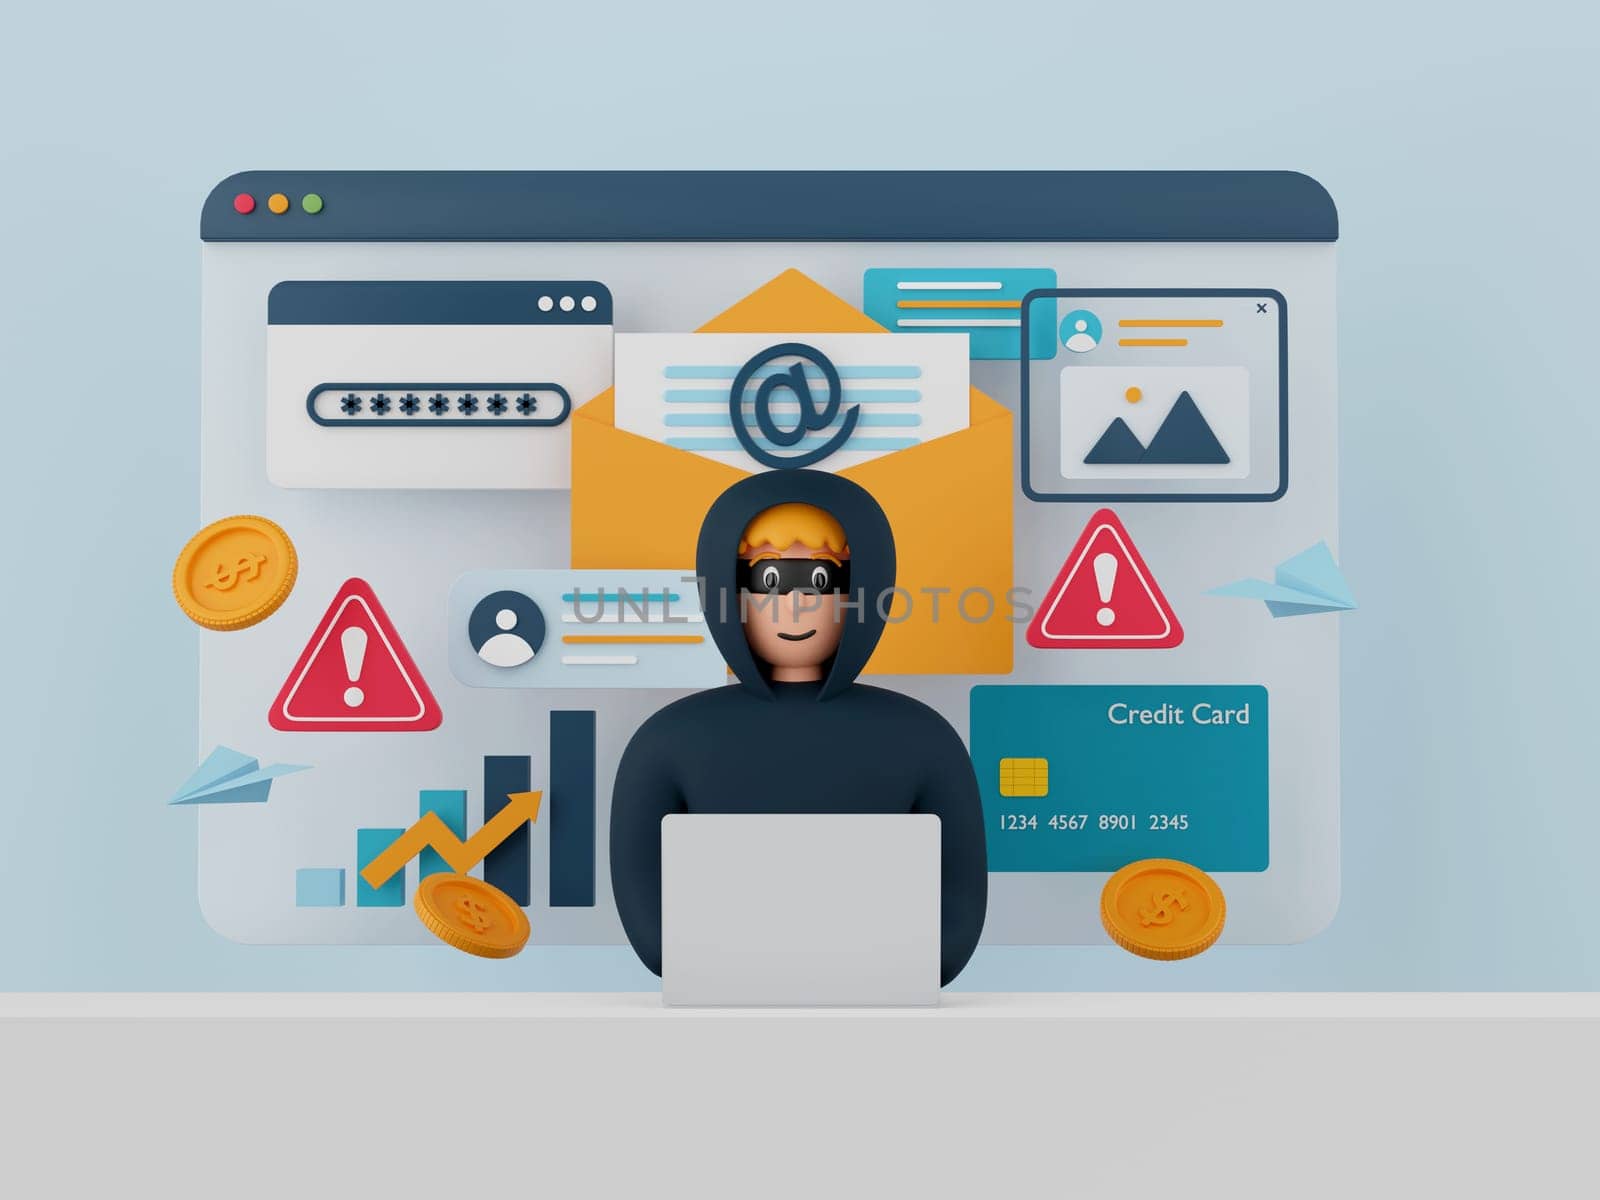 3d illustration of Data phishing concept, Hacker and Cyber criminals phishing stealing private personal data, password, email and credit card. Online scam, malware and password phishing.